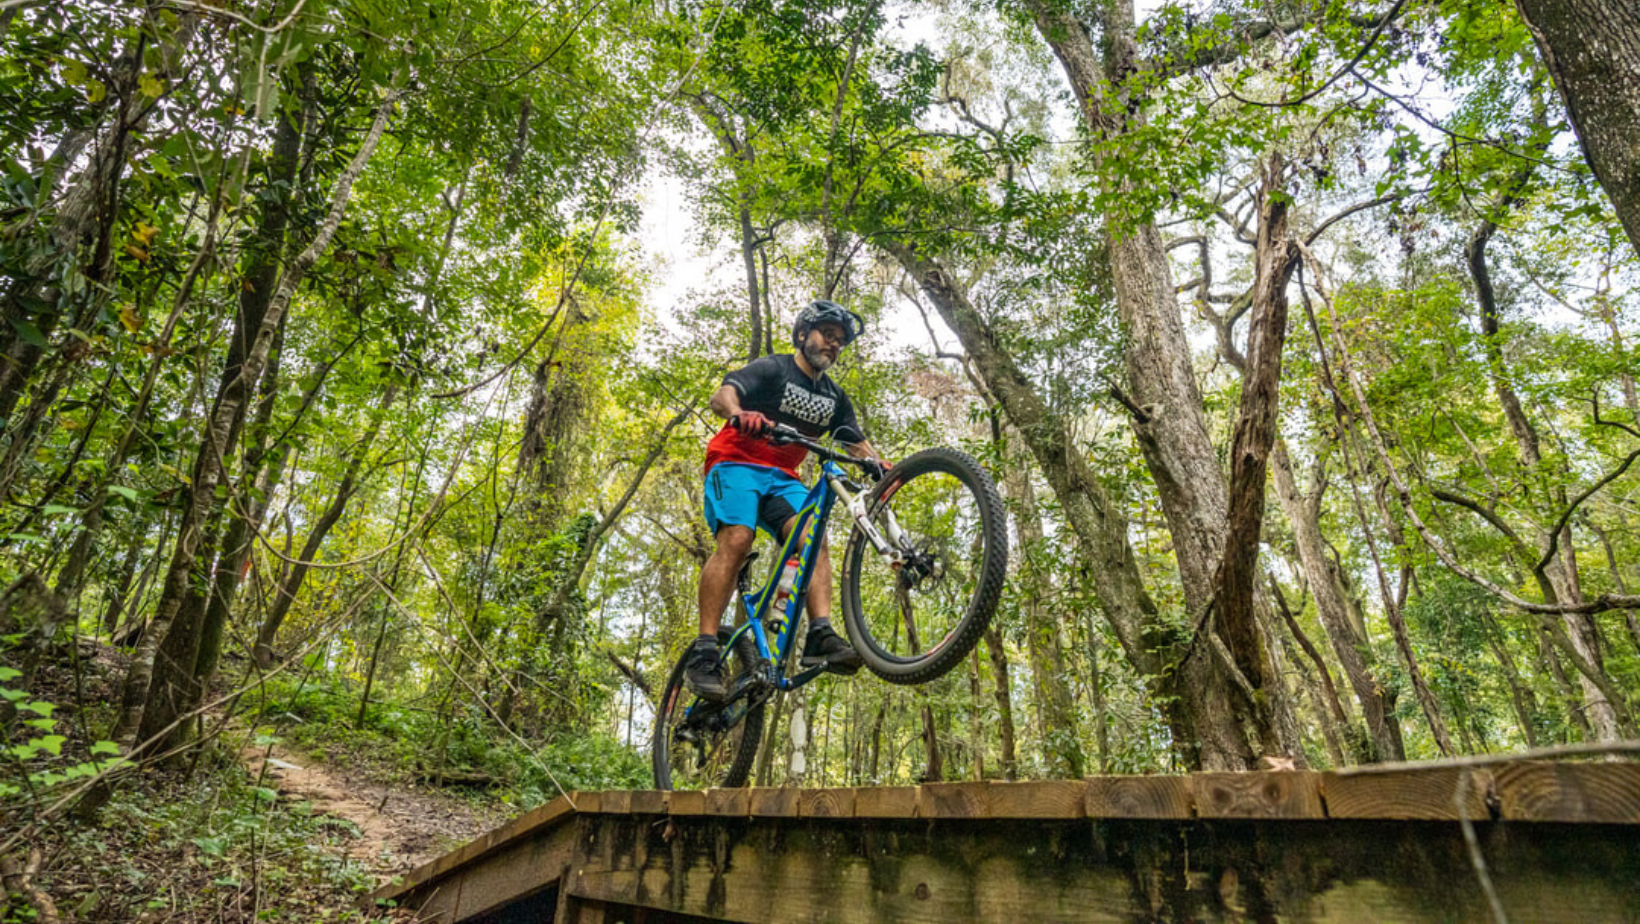 Biking in Tallahassee on outdoor trails